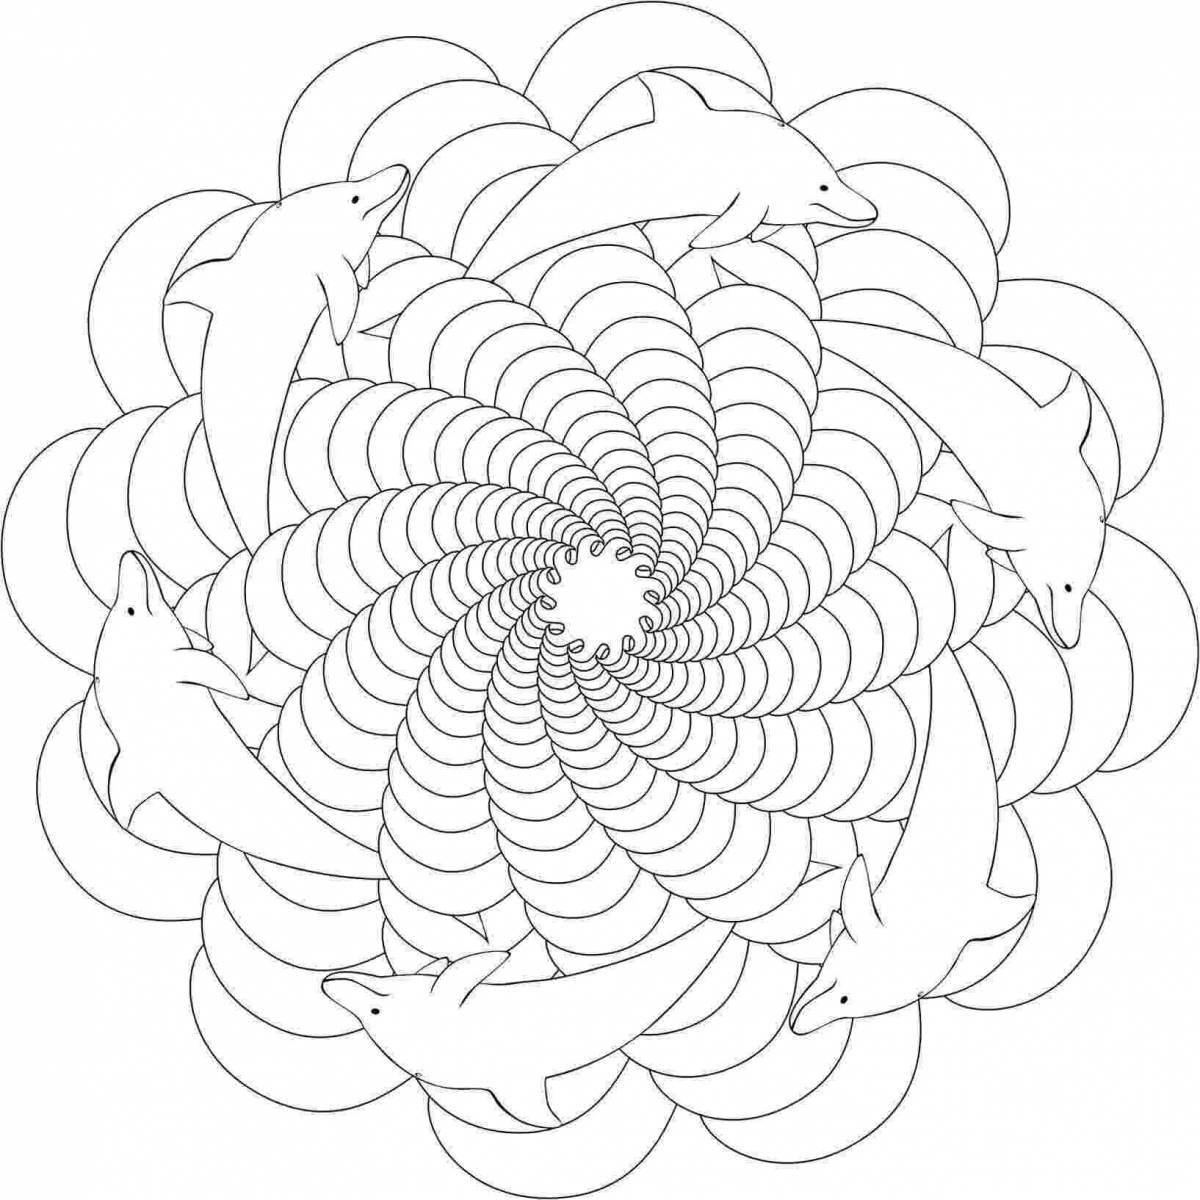 Coloring dazzling spiral